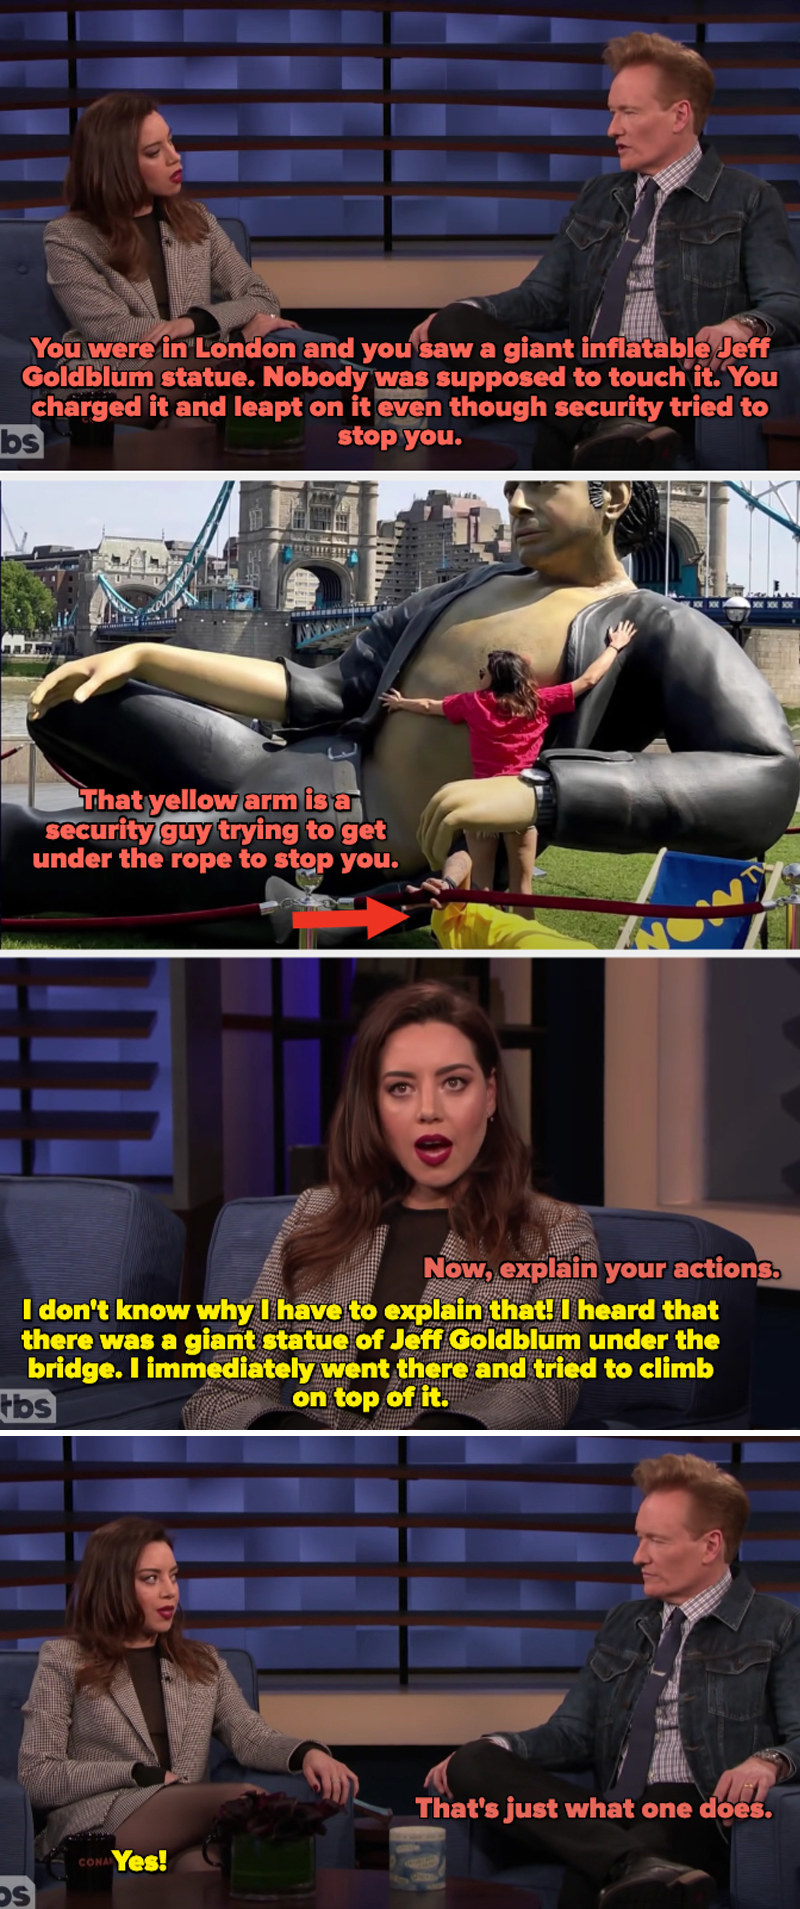 Aubrey explaining how she ran past security to try to climb a giant inflatable gold Jeff Goldblum statue